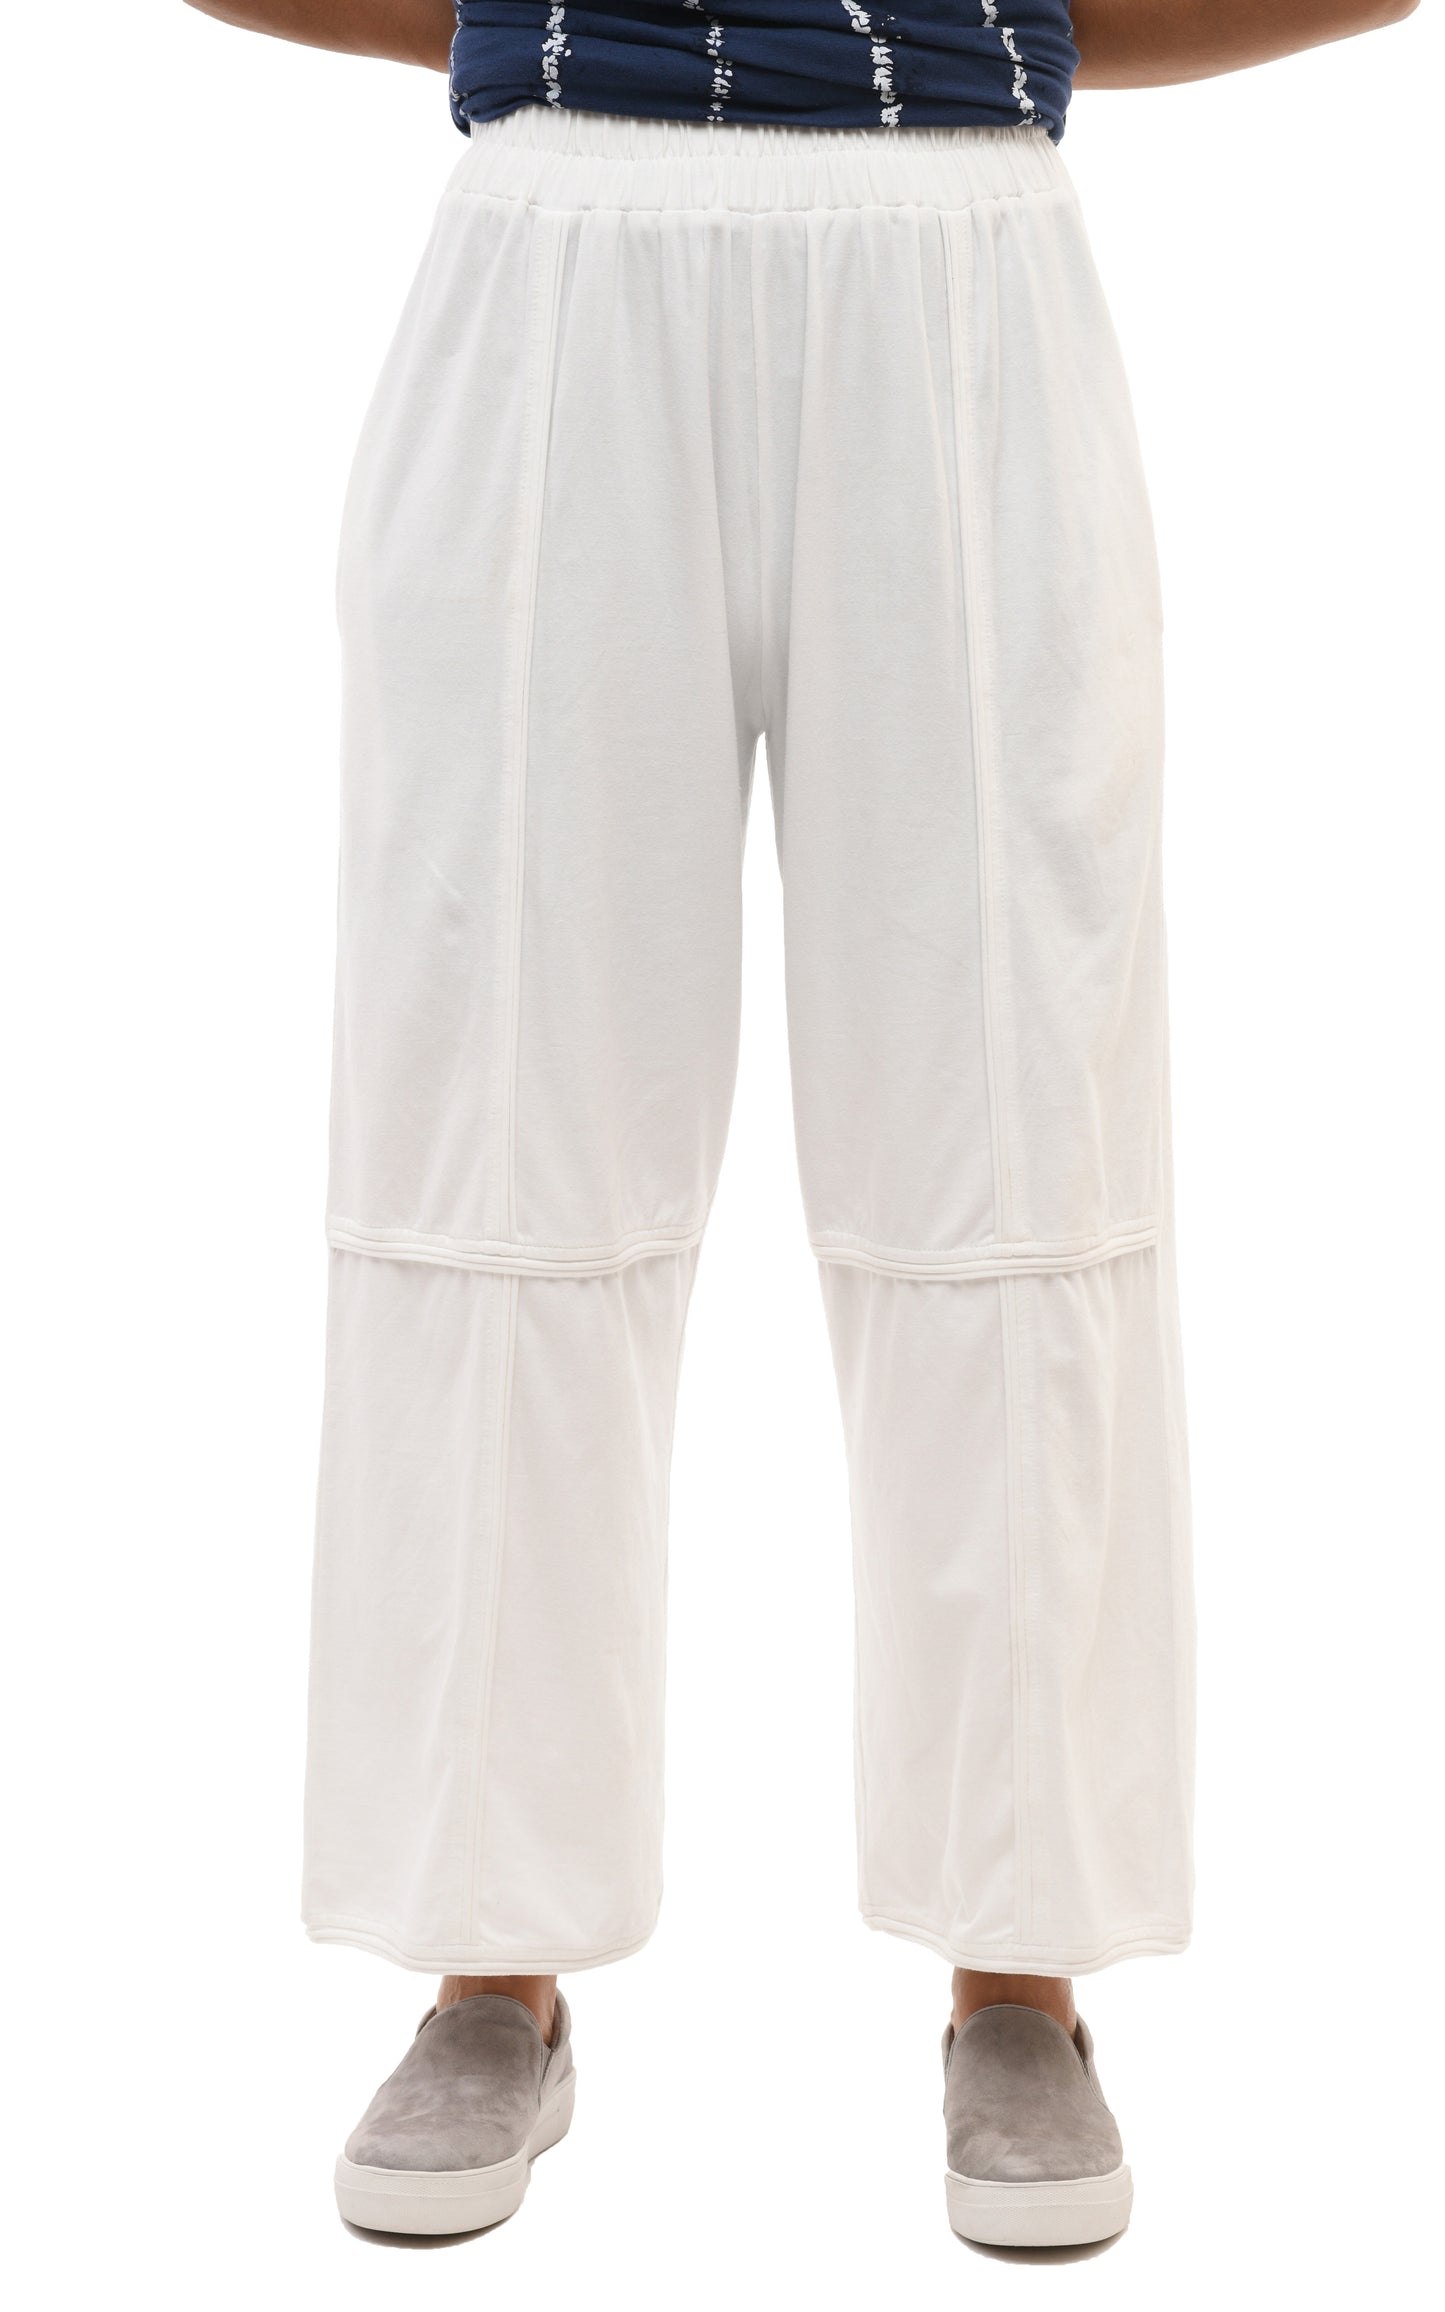 SDM328 Laila Lounge Pant in Cream Cotton by Snapdragon & Twig (Modal)